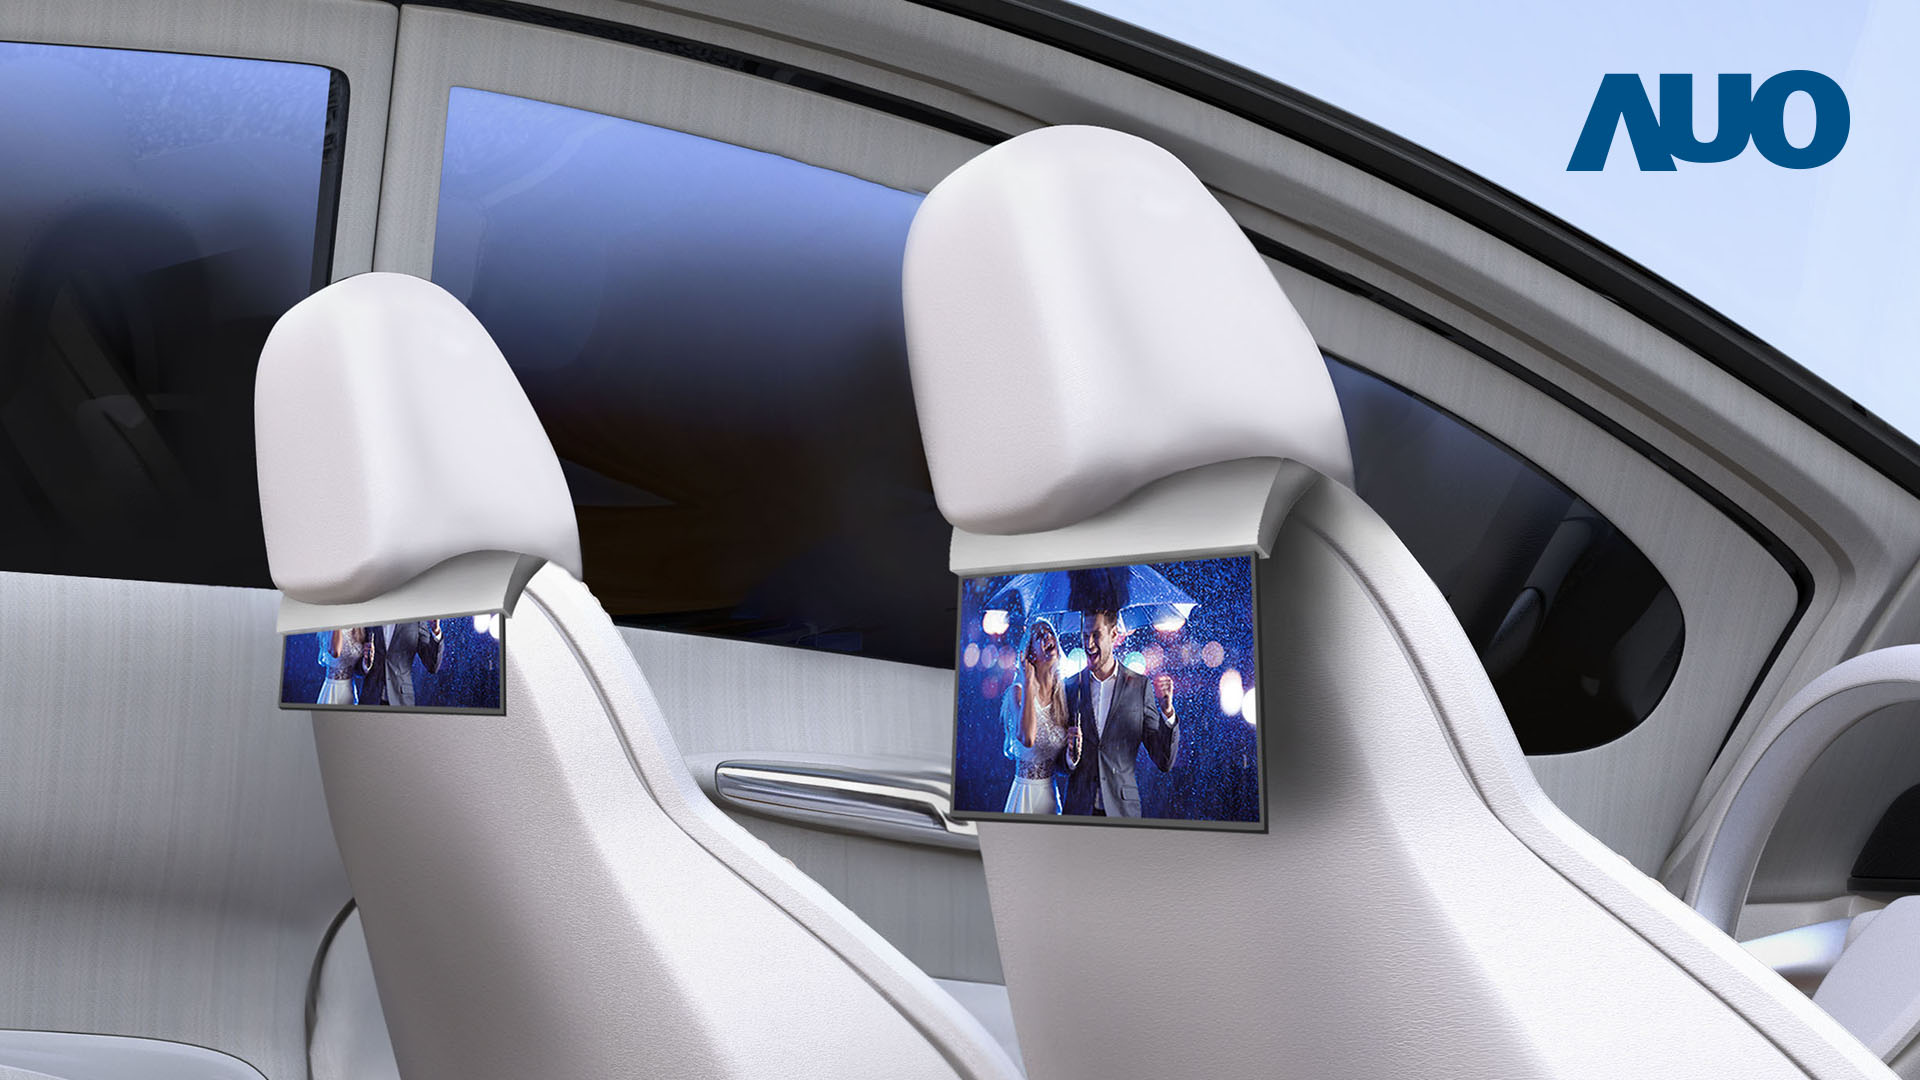 The Rollable RSE is the world’s first rollable rear-seat entertainment display*, recognized as CES Innovation Awards Honoree, leveraging the flexible and bendable advantages of Micro LED technology to provide greater design flexibility